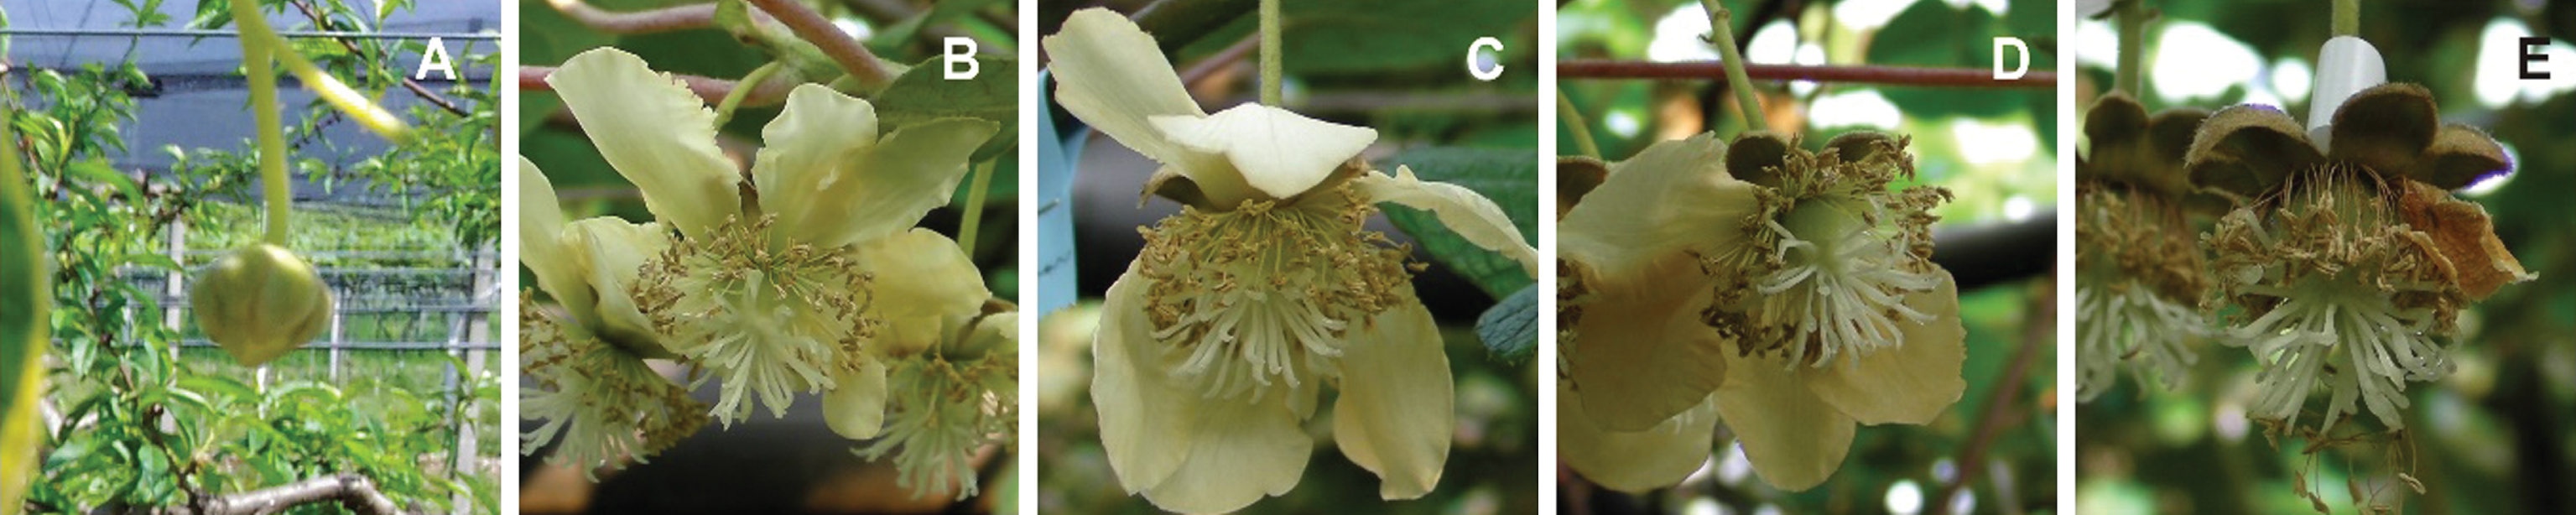 The marked flower at the time of pollination, with colored ribbon, allow to evaluate the fruit size according to the original flowering stage during pollination. A closed flower; B white petals; C ocher petals; D early petals fall; E petals fall.